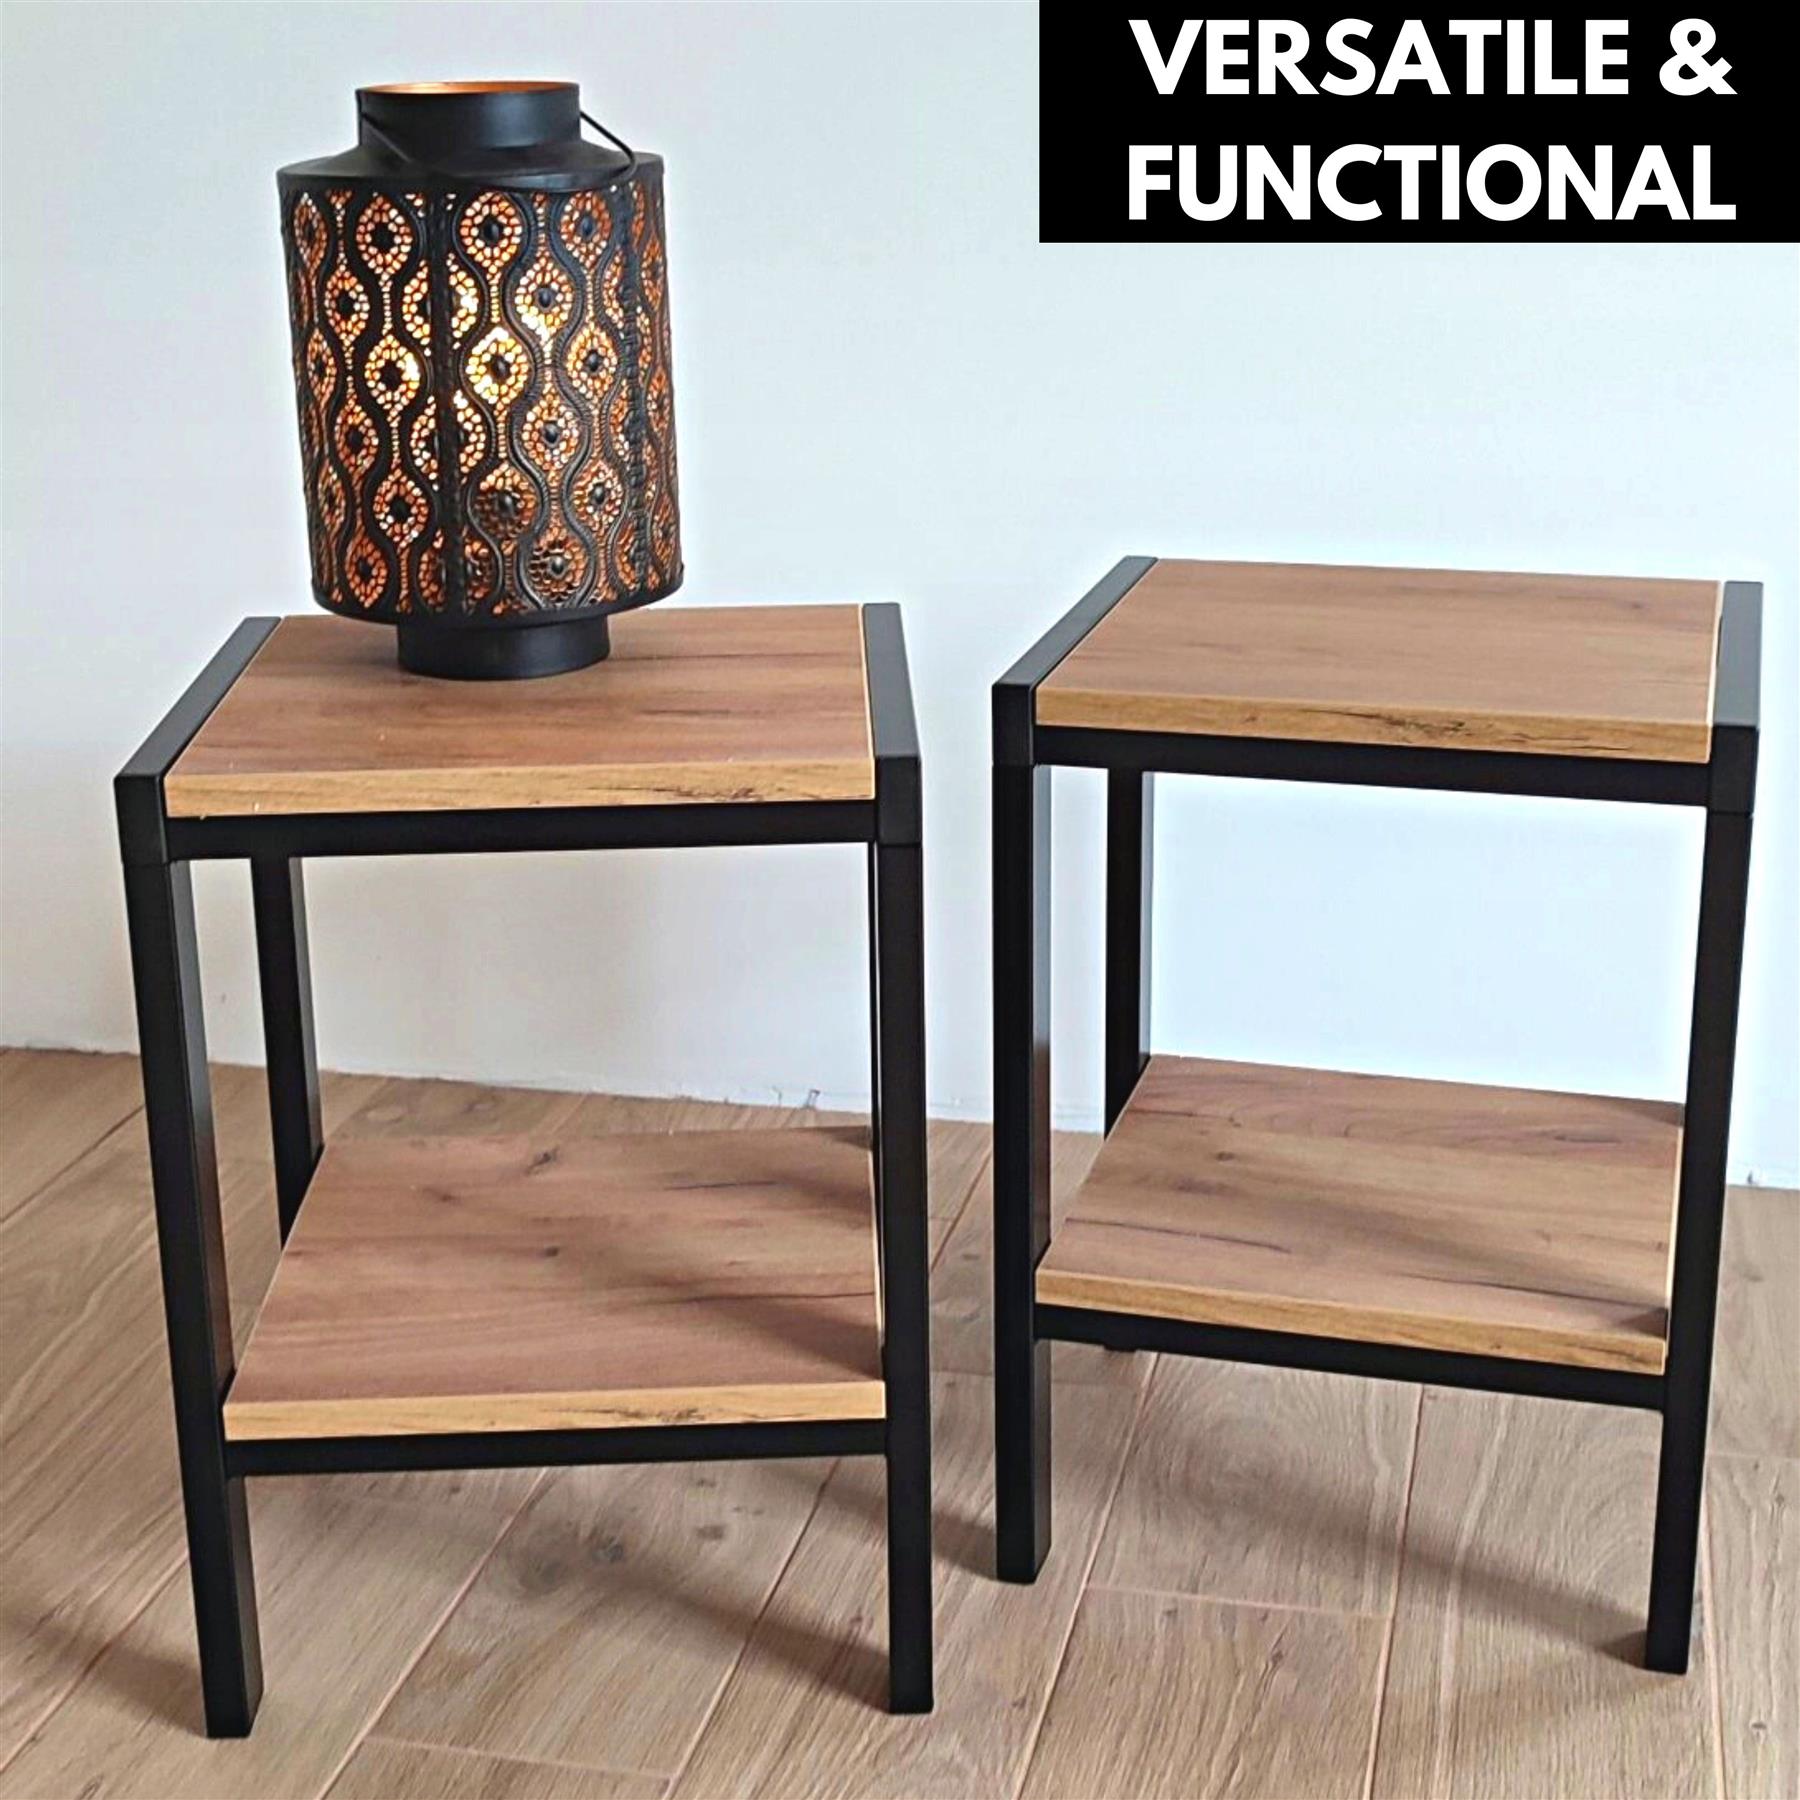 Living Room Small Side Table - Fully Assembled Powder Painted Small End Tables for Small Spaces